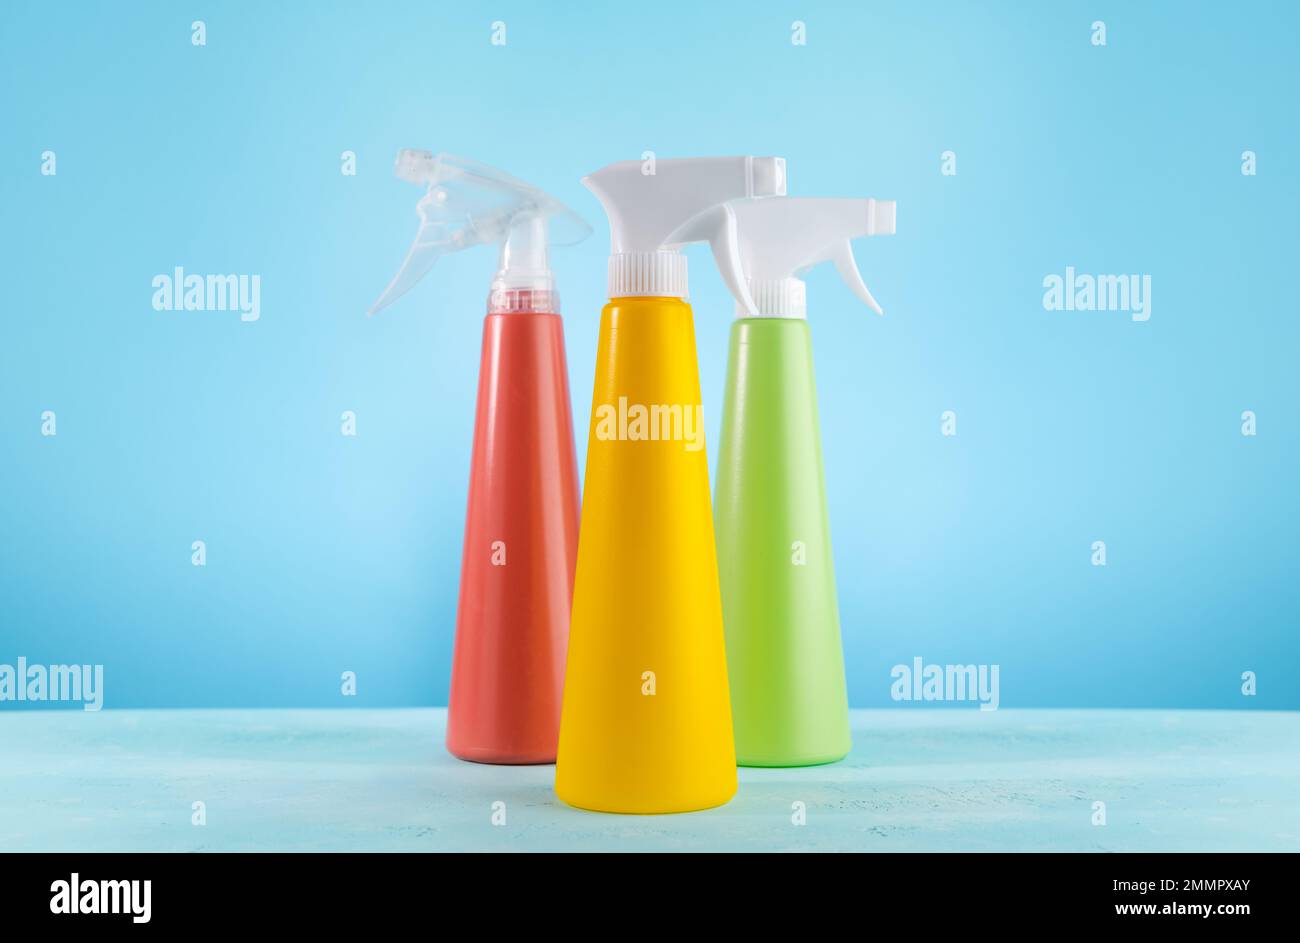 Cleaning Spray Bottles of detergent and bubbles soap.Concept of spring cleaning home. Colored supplies for cleaning on blue background. Stock Photo